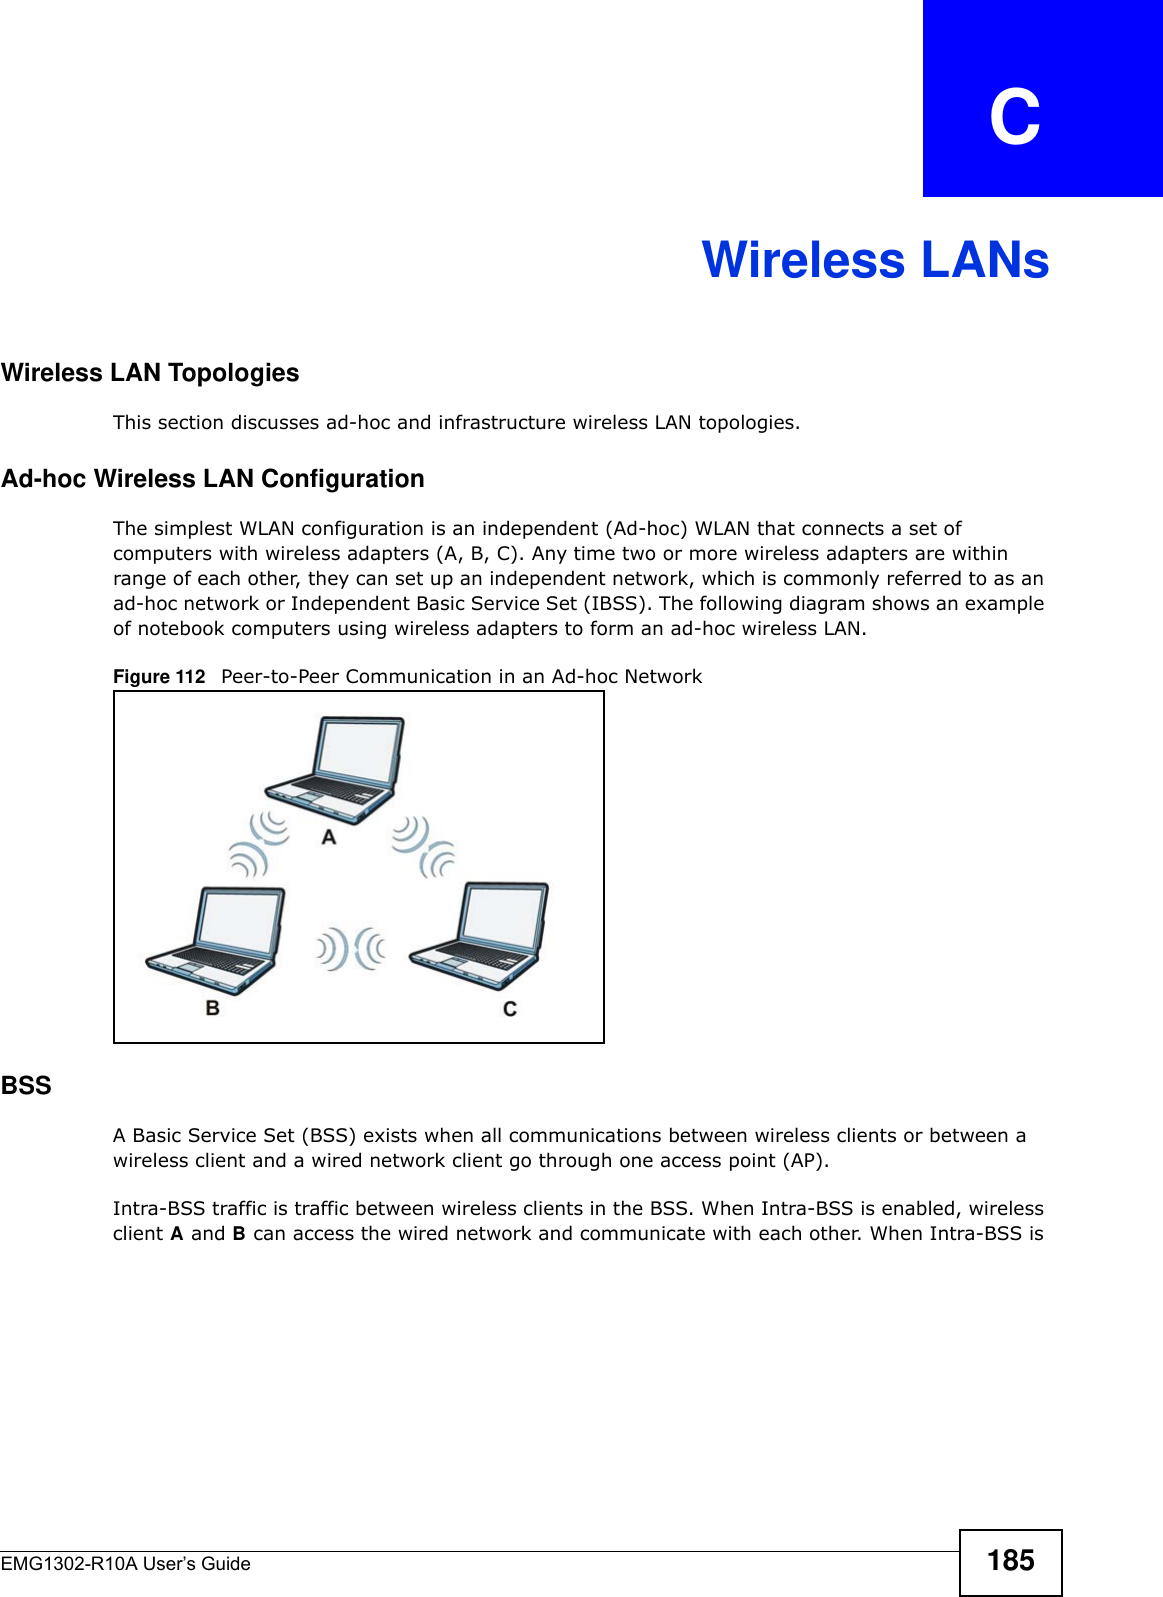 EMG1302-R10A User’s Guide 185APPENDIX   CWireless LANsWireless LAN TopologiesThis section discusses ad-hoc and infrastructure wireless LAN topologies.Ad-hoc Wireless LAN ConfigurationThe simplest WLAN configuration is an independent (Ad-hoc) WLAN that connects a set of computers with wireless adapters (A, B, C). Any time two or more wireless adapters are within range of each other, they can set up an independent network, which is commonly referred to as an ad-hoc network or Independent Basic Service Set (IBSS). The following diagram shows an example of notebook computers using wireless adapters to form an ad-hoc wireless LAN. Figure 112   Peer-to-Peer Communication in an Ad-hoc NetworkBSSA Basic Service Set (BSS) exists when all communications between wireless clients or between a wireless client and a wired network client go through one access point (AP). Intra-BSS traffic is traffic between wireless clients in the BSS. When Intra-BSS is enabled, wireless client A and B can access the wired network and communicate with each other. When Intra-BSS is 